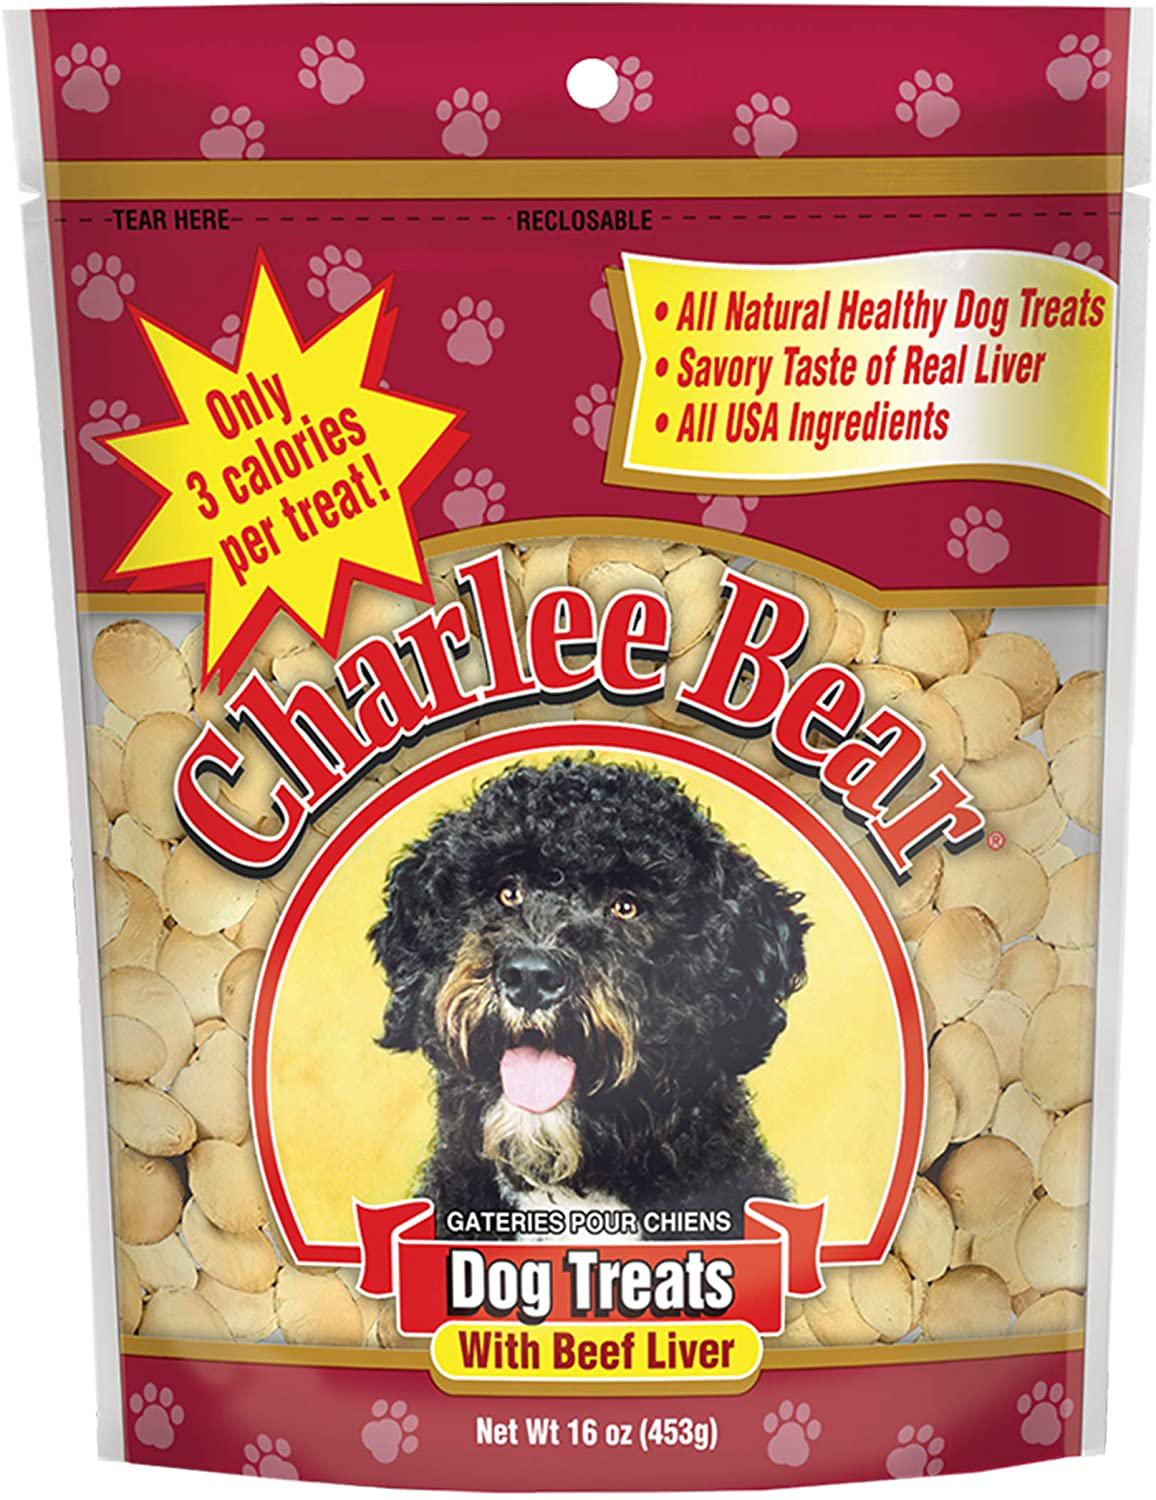 Charlee Bear Original Crunch Beef Liver Dog Treats, 16 Oz - Made in the USA, Natural Training Treats for Dogs Animals & Pet Supplies > Pet Supplies > Dog Supplies > Dog Treats Charlee Bear 1 Pound (Pack of 1)  